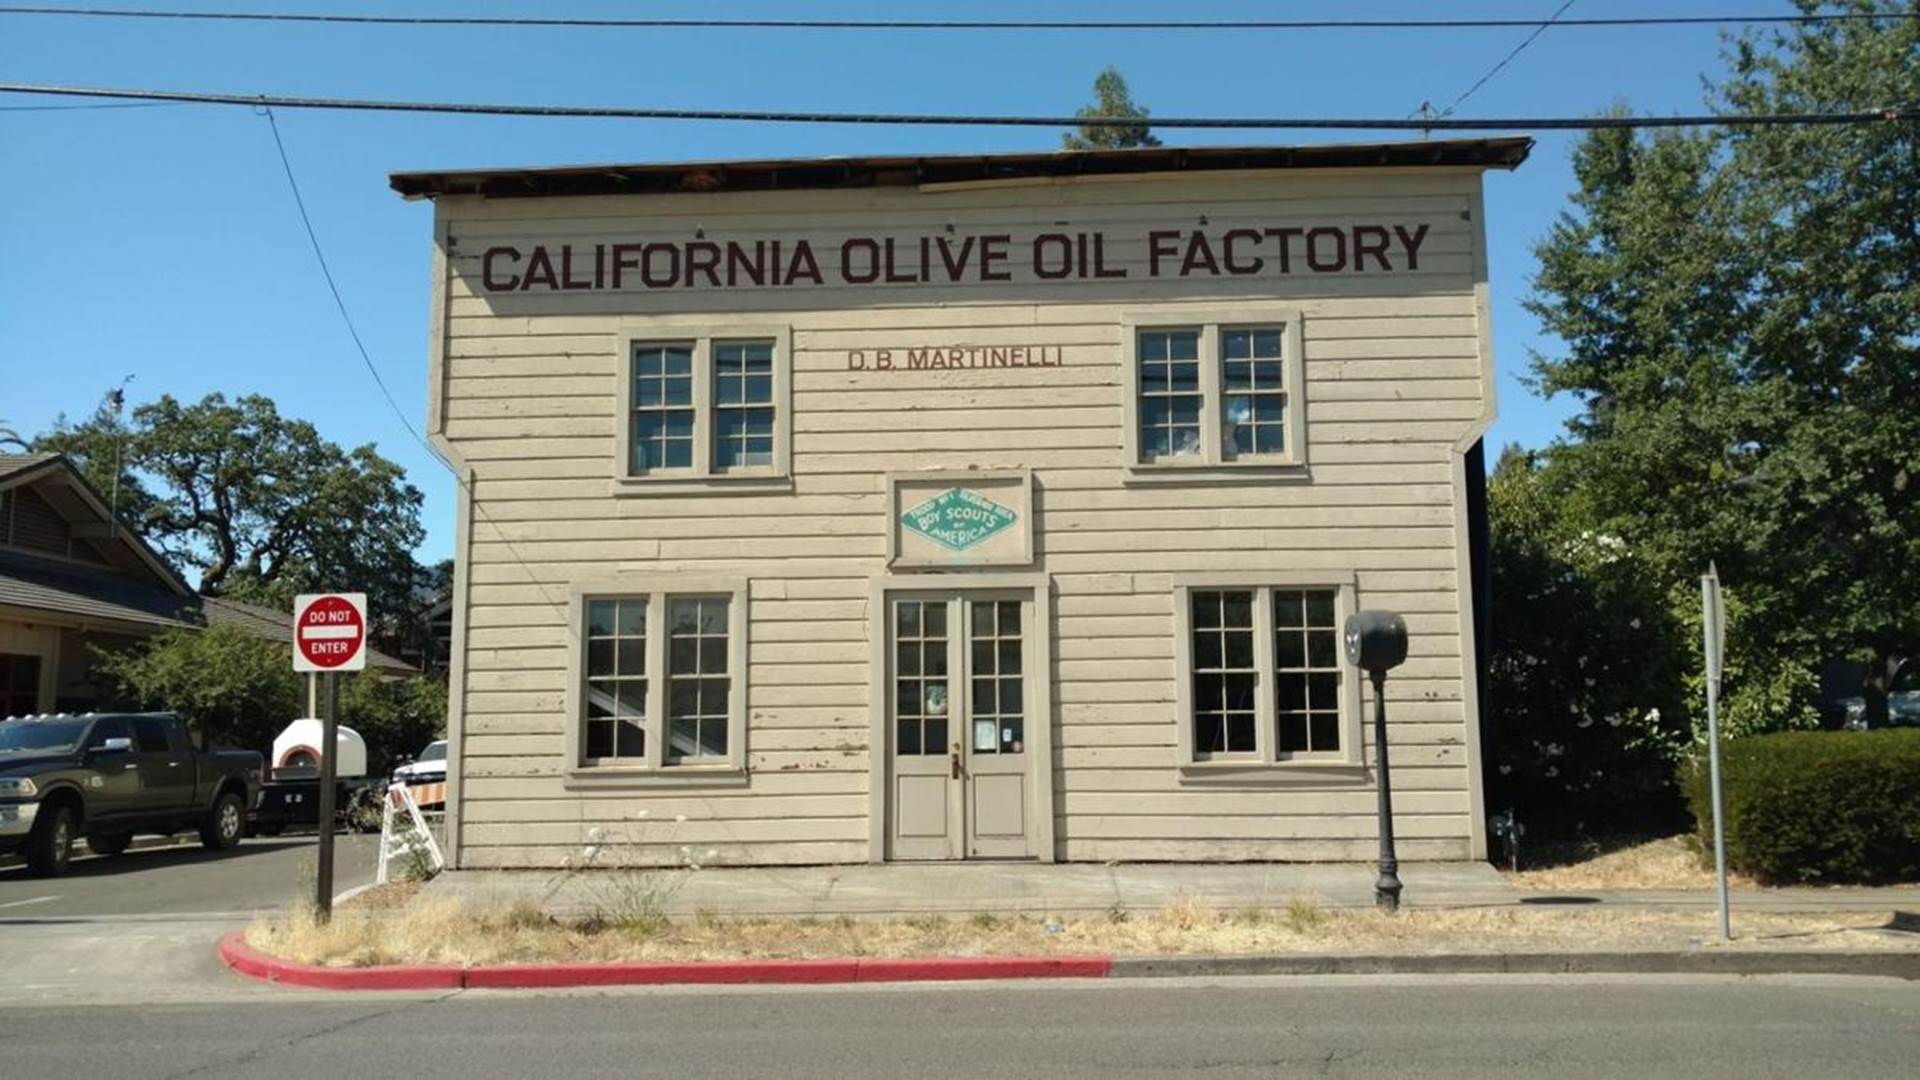 Scout Hall: From olive oil factory to home of scouting in St. Helena